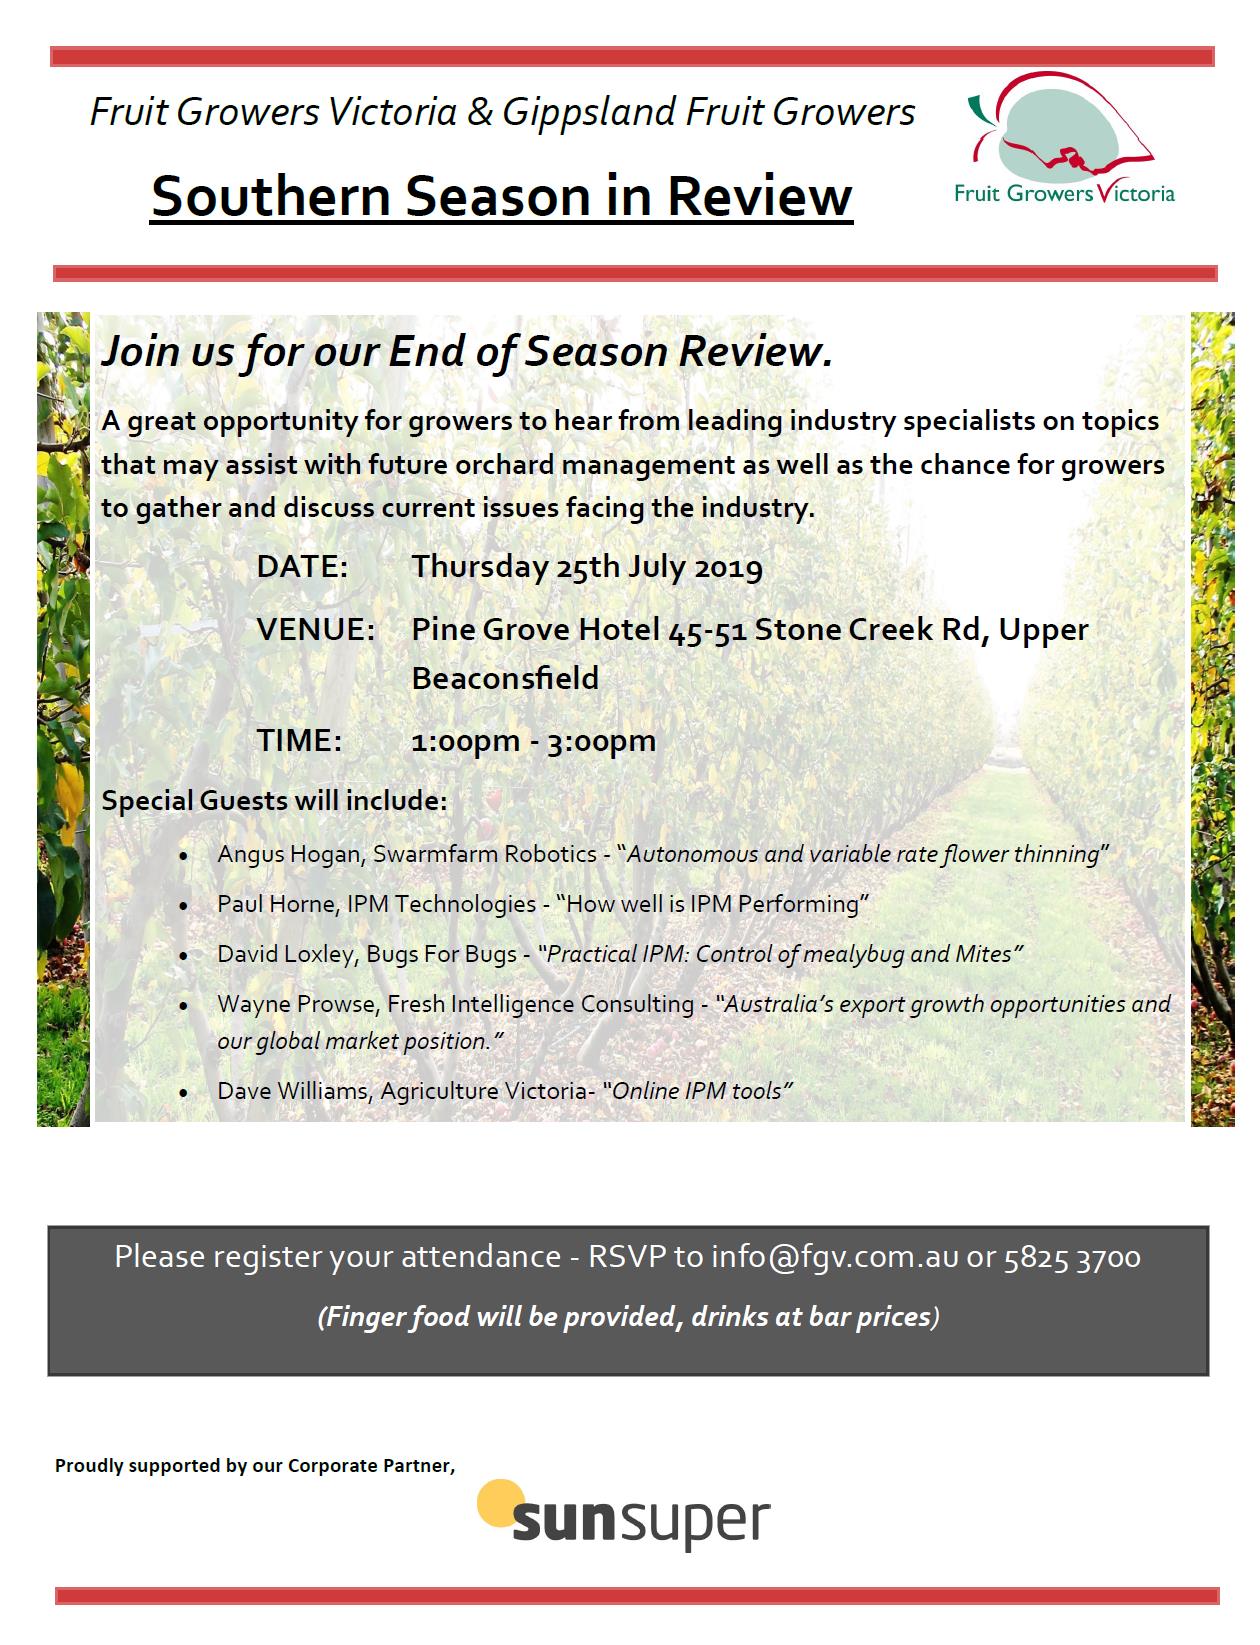 Southern Season In Review flyer